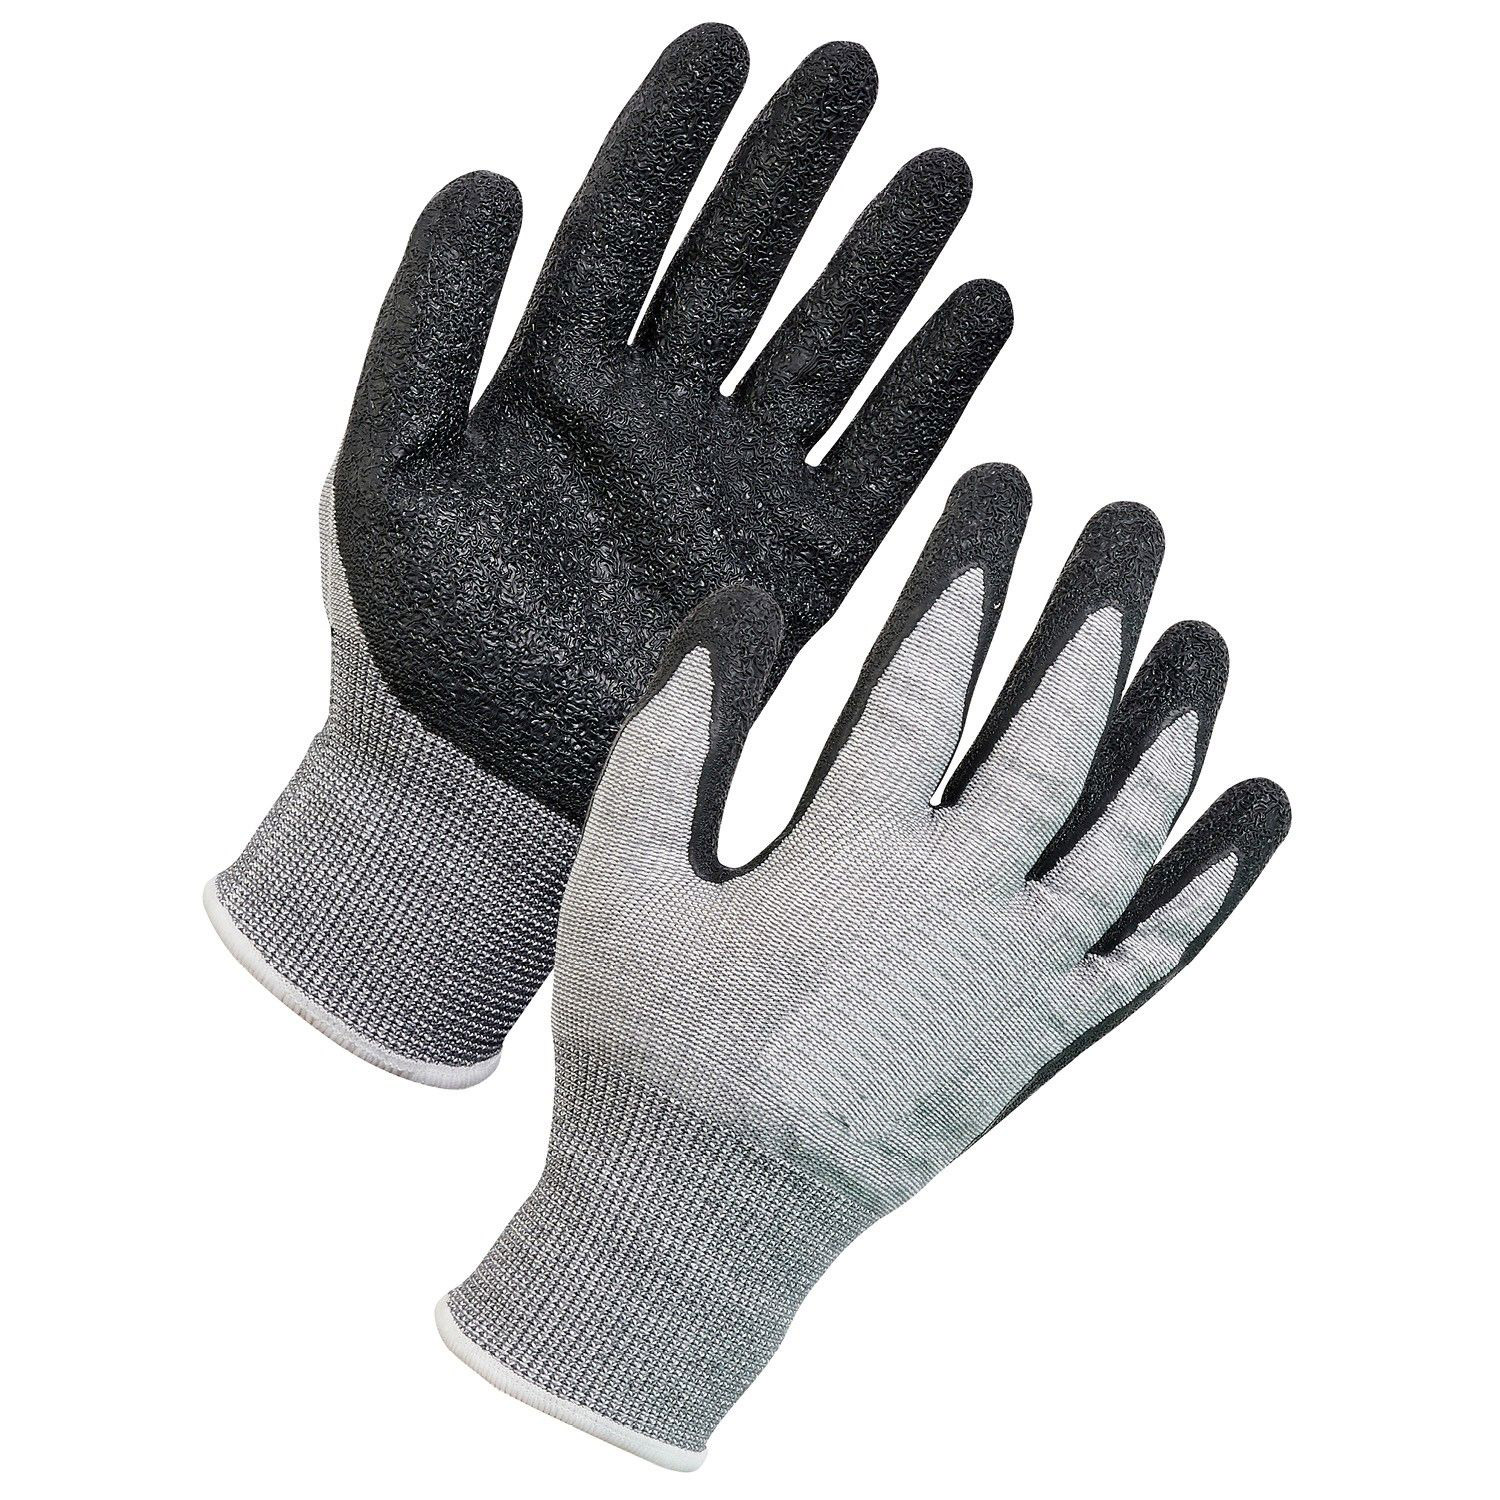 Level E Cut Resistant Gloves with Latex Palm Coating